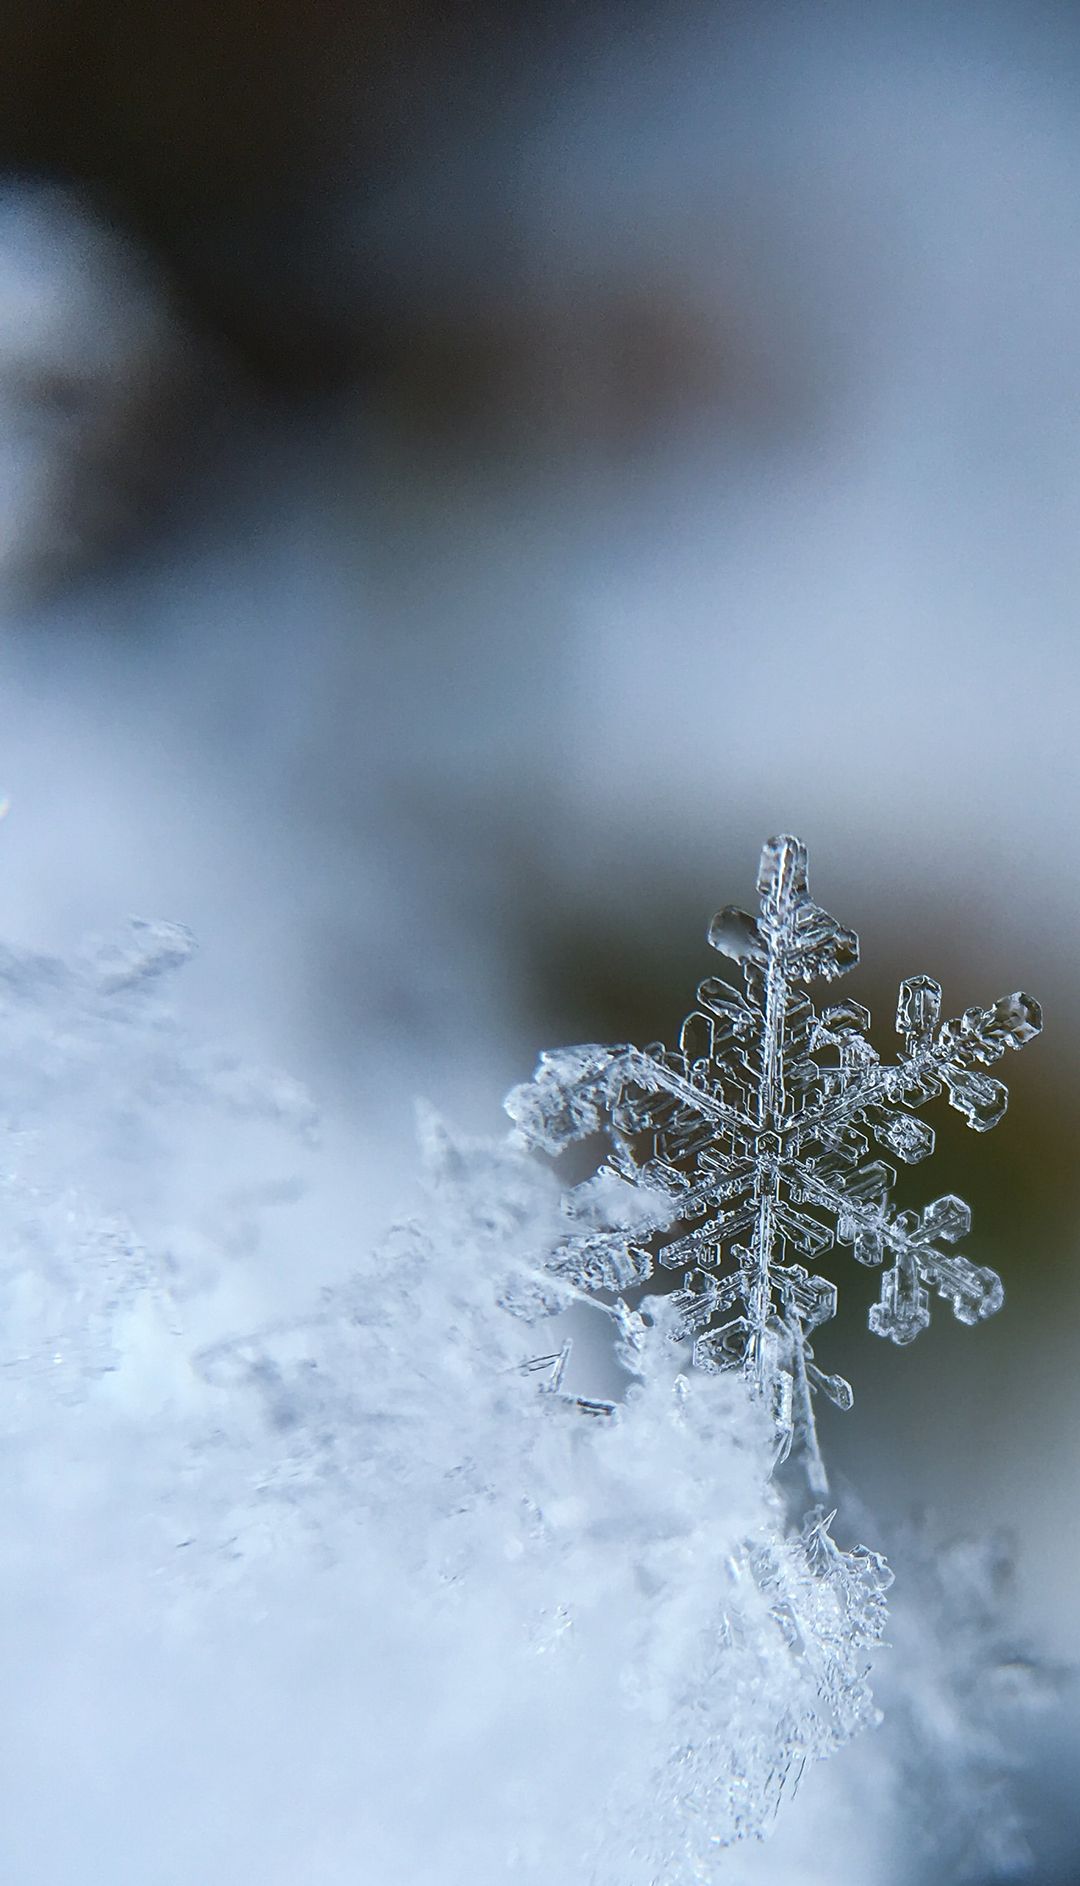 A snowflake is seen on a frozen surface in this picture - Snowflake, ice